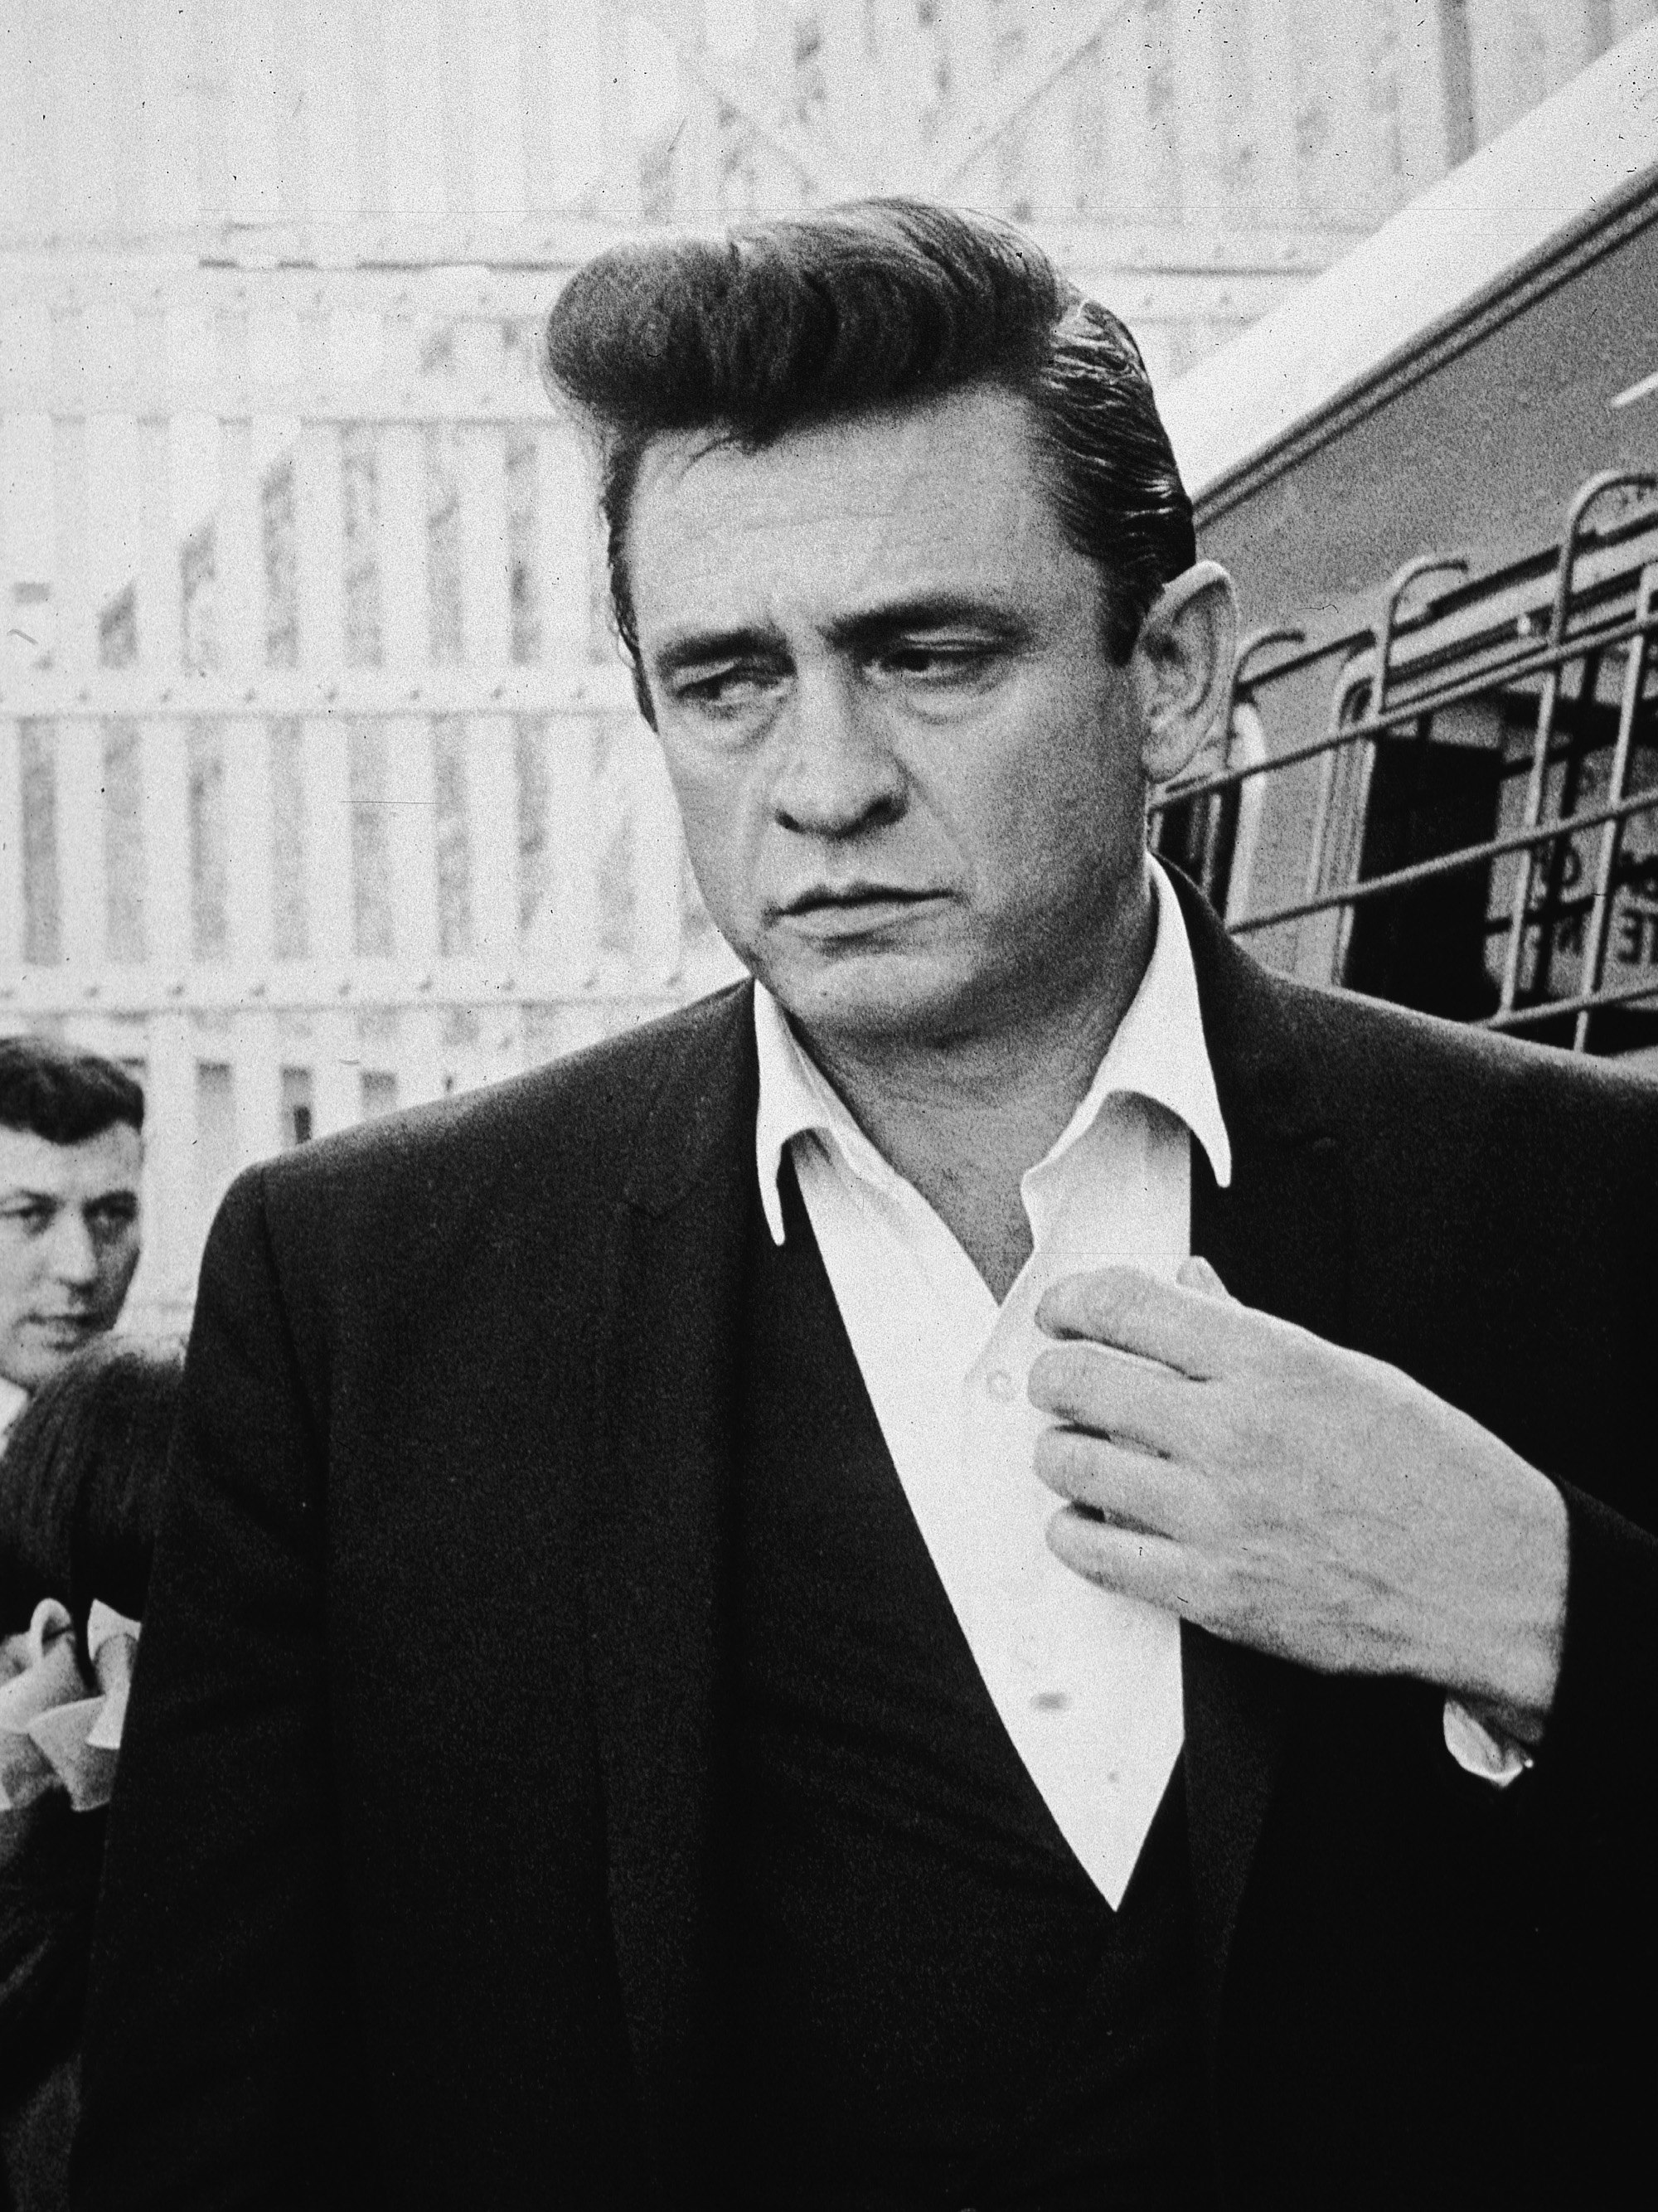 Johnny Cash at Folsom Prison, where his iconic live album was recorded in 1968.